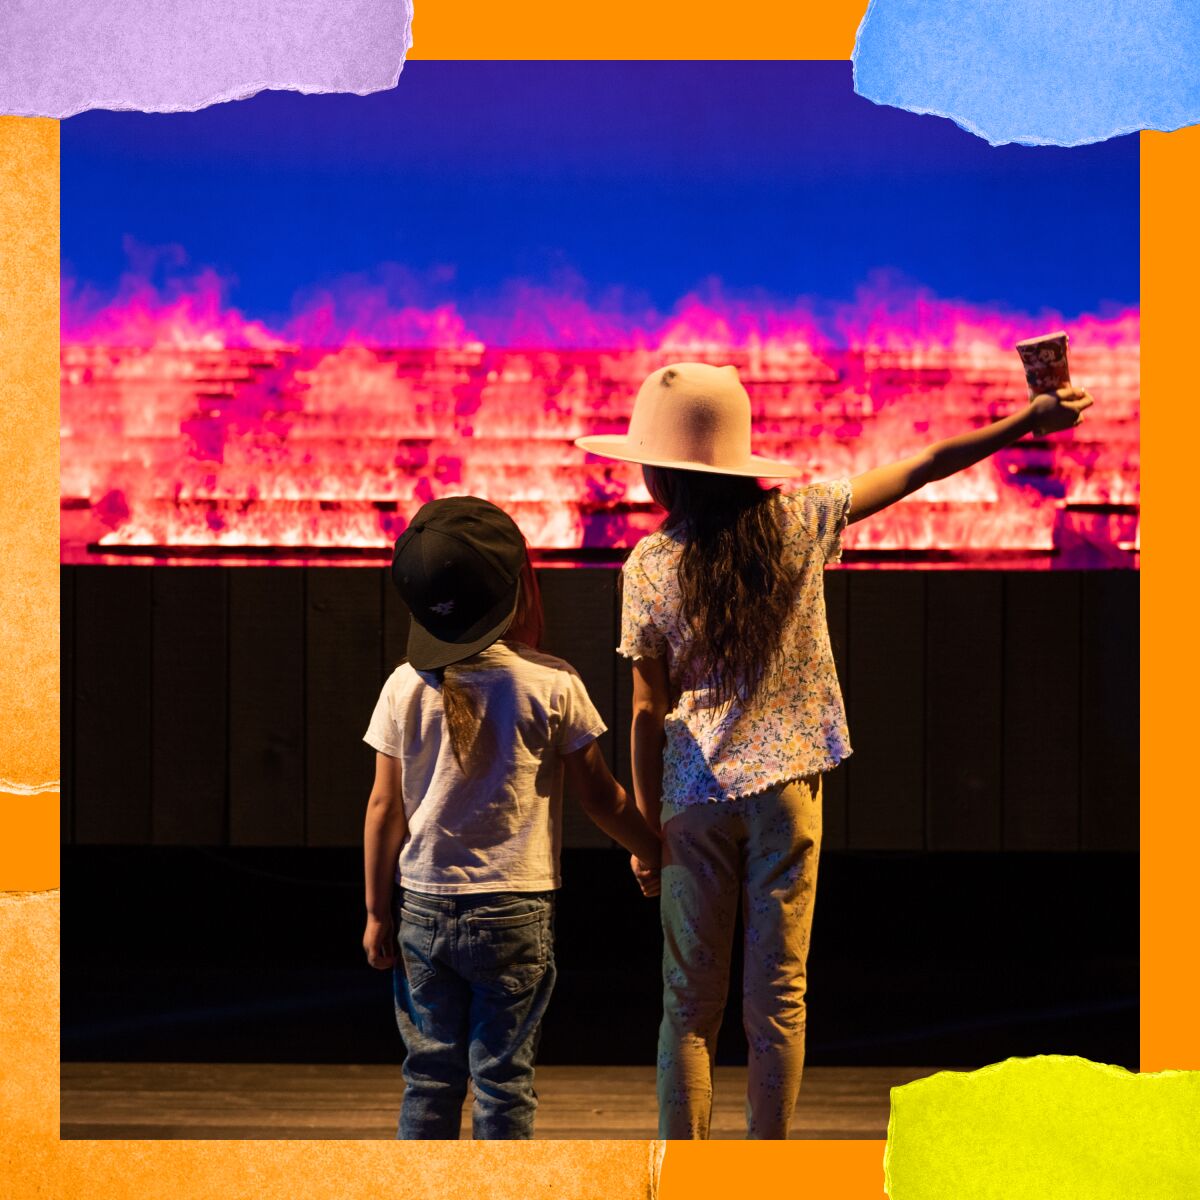 Two children in hats stand holding hands in front of a glowing landscape.